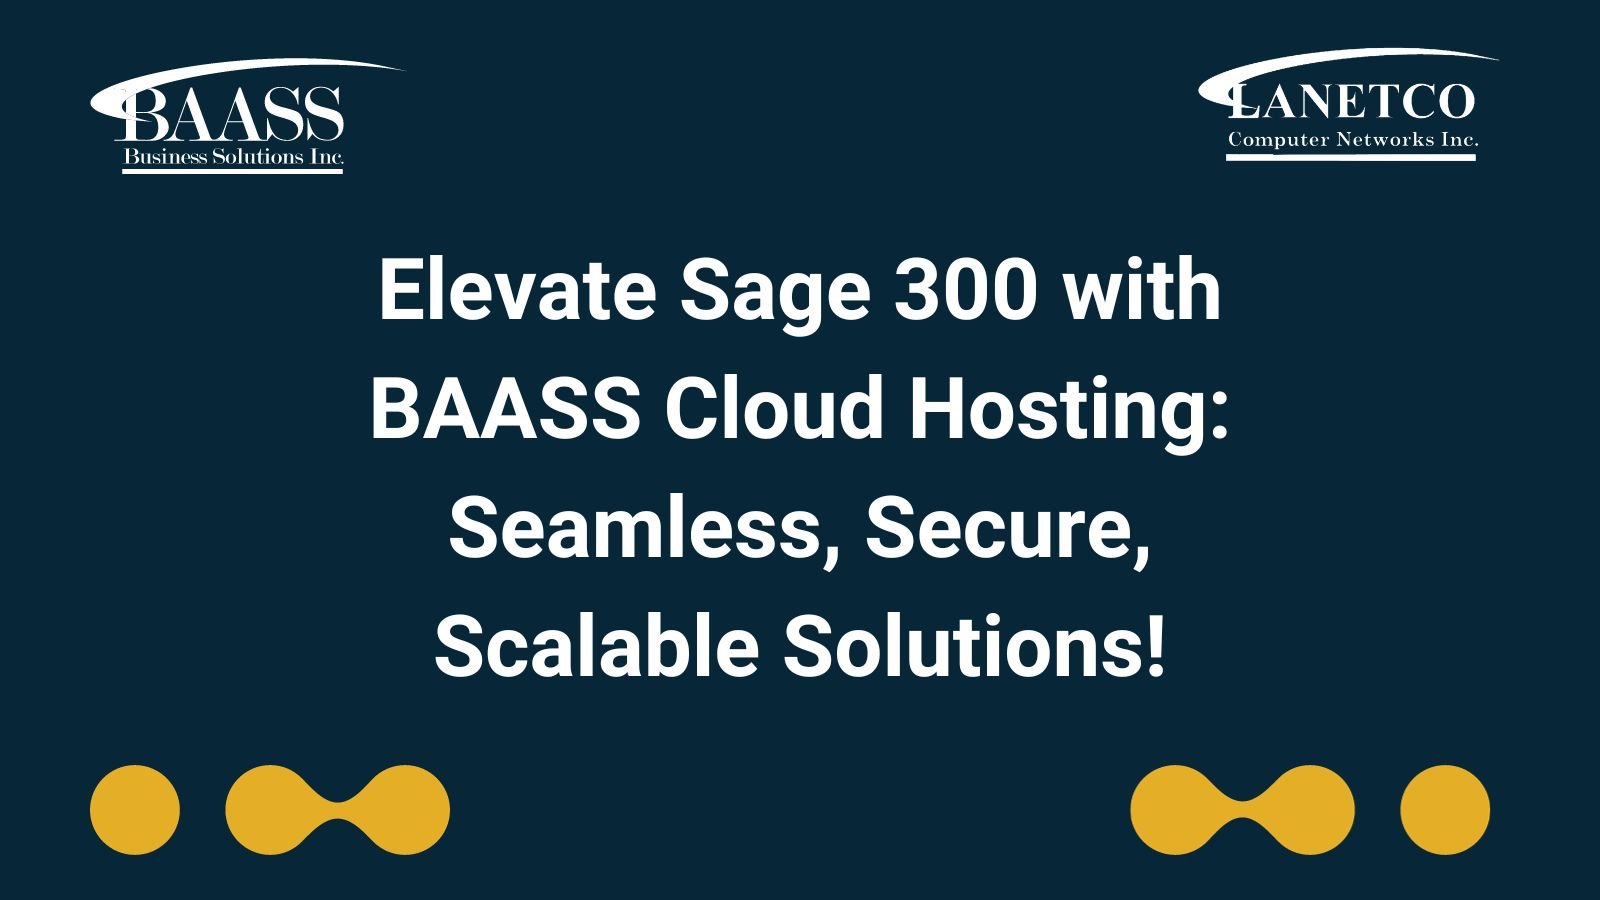 Elevate Sage 300 with BAASS Cloud Hosting: Seamless, Secure, Scalable Solutions!